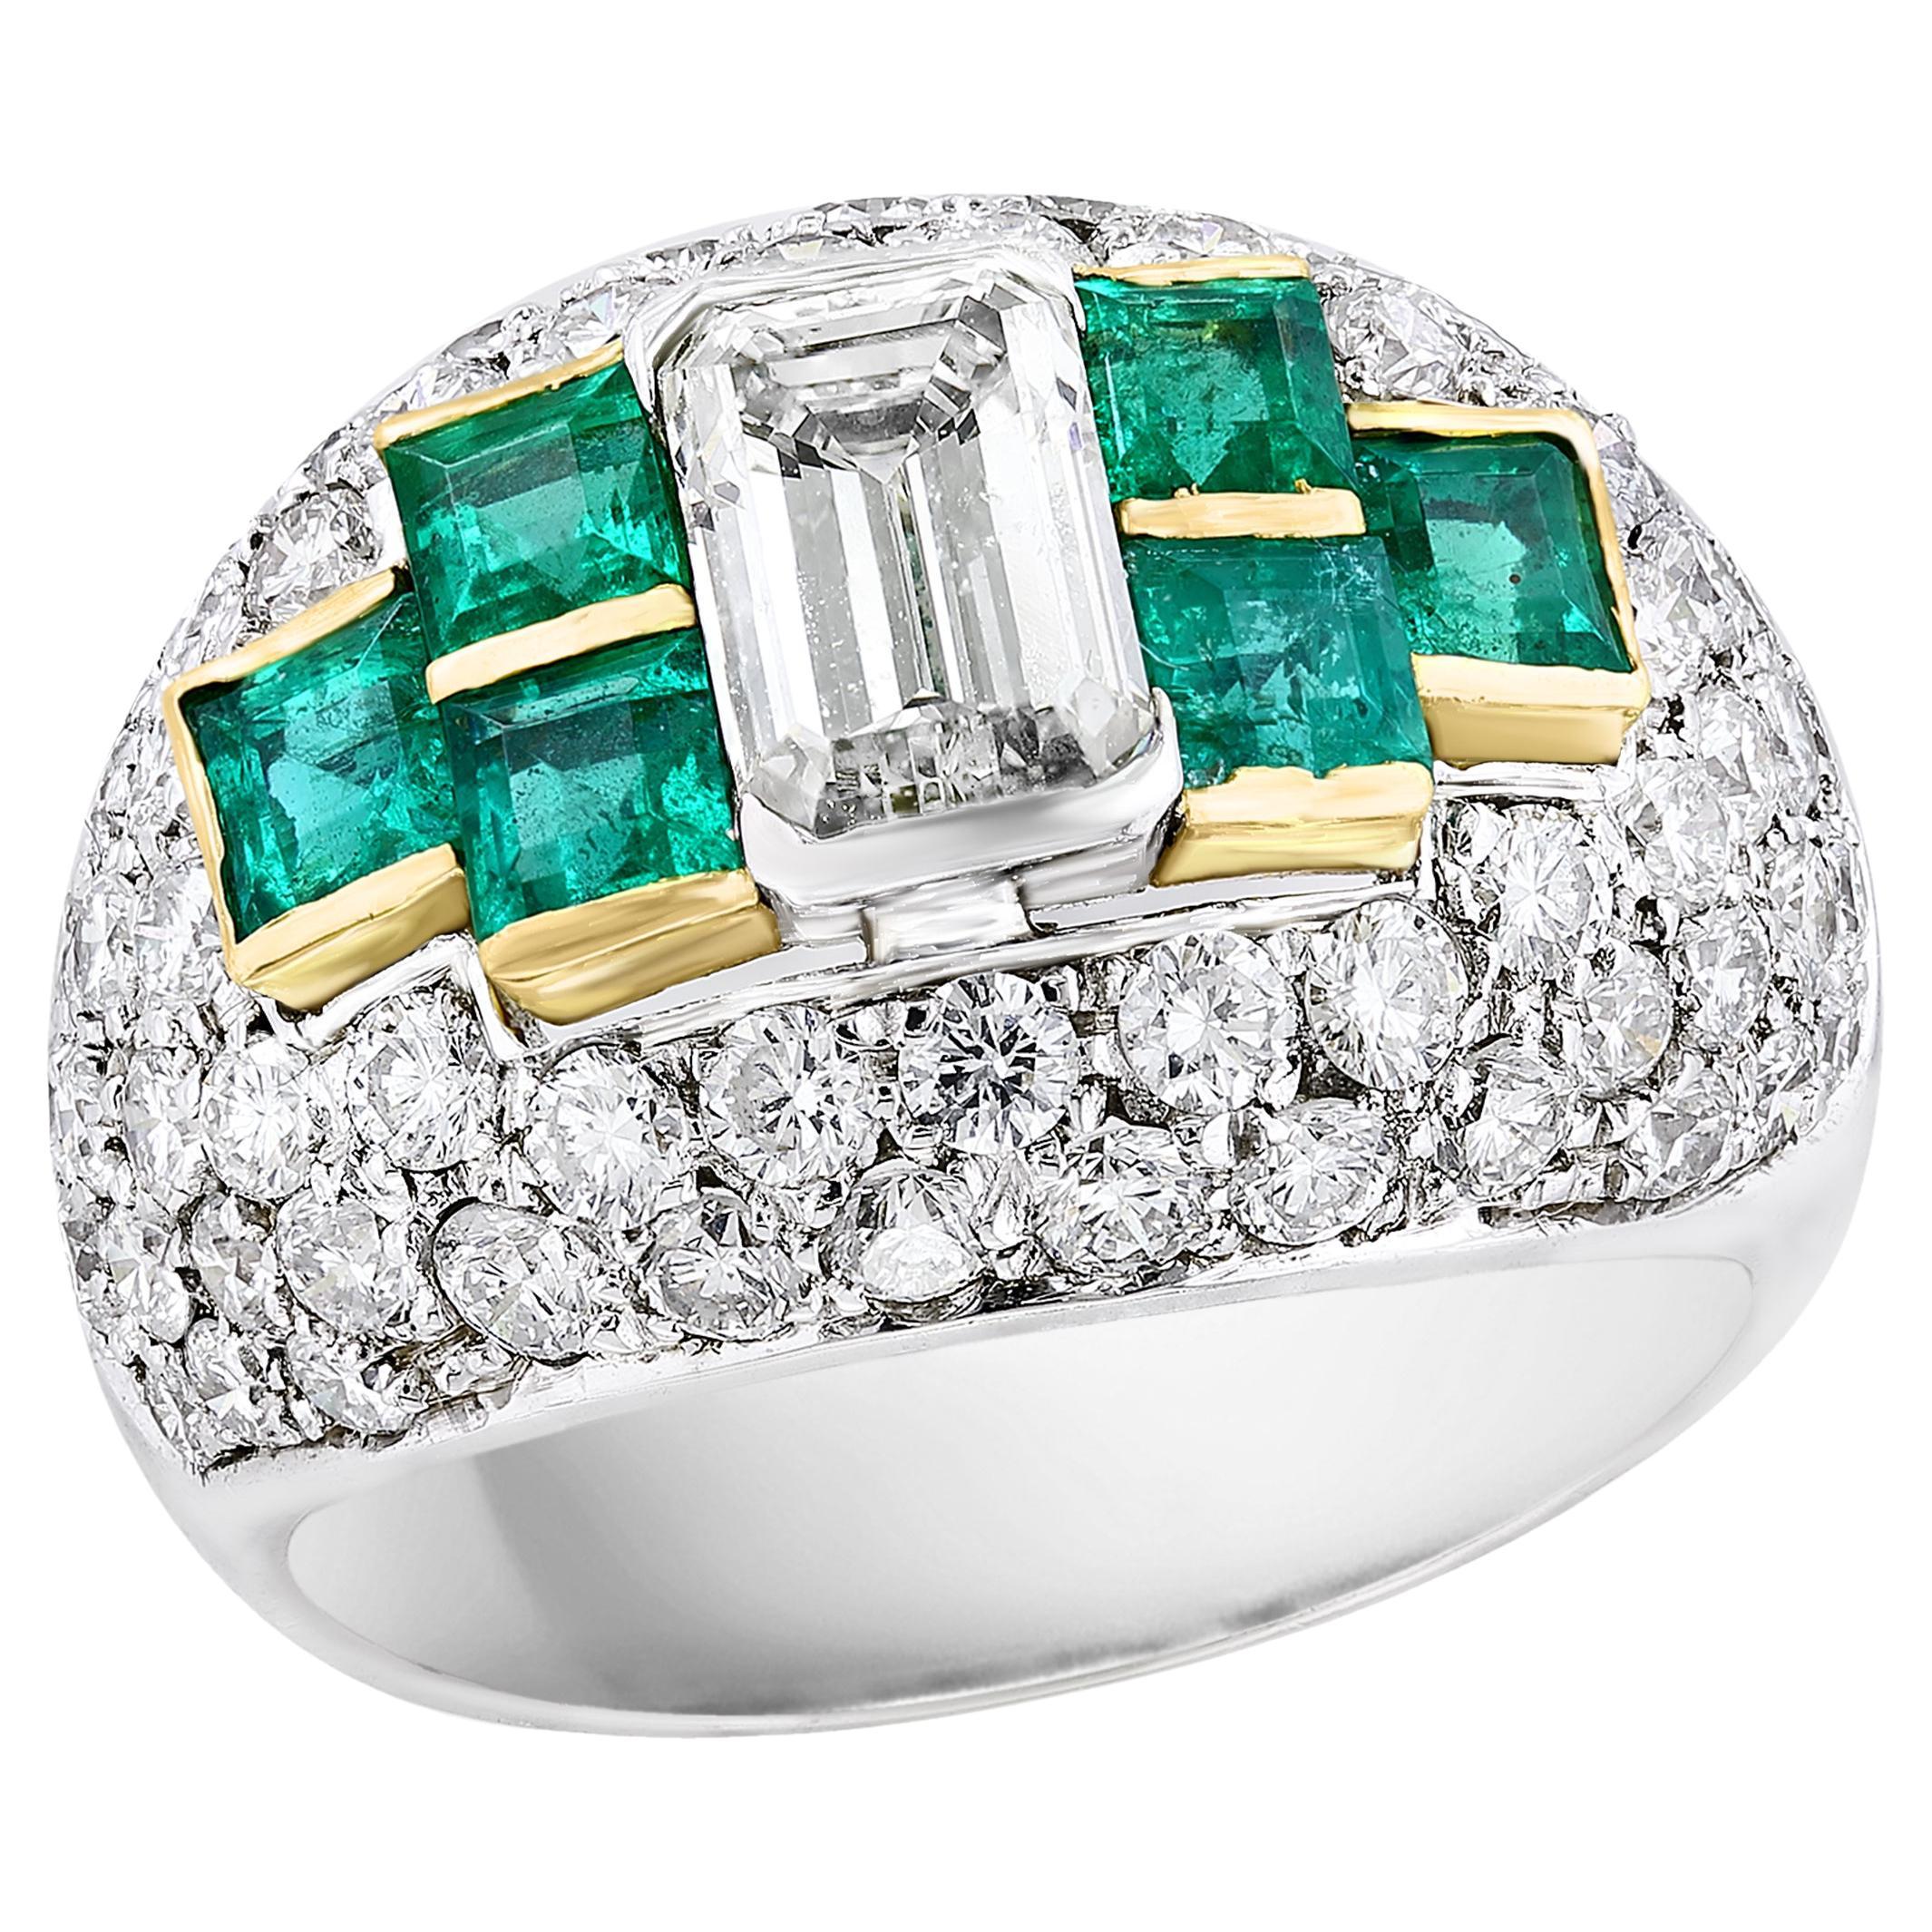 1.17 Carat Diamond and Emerald Cocktail Dome Ring in 18K Mix Gold For Sale